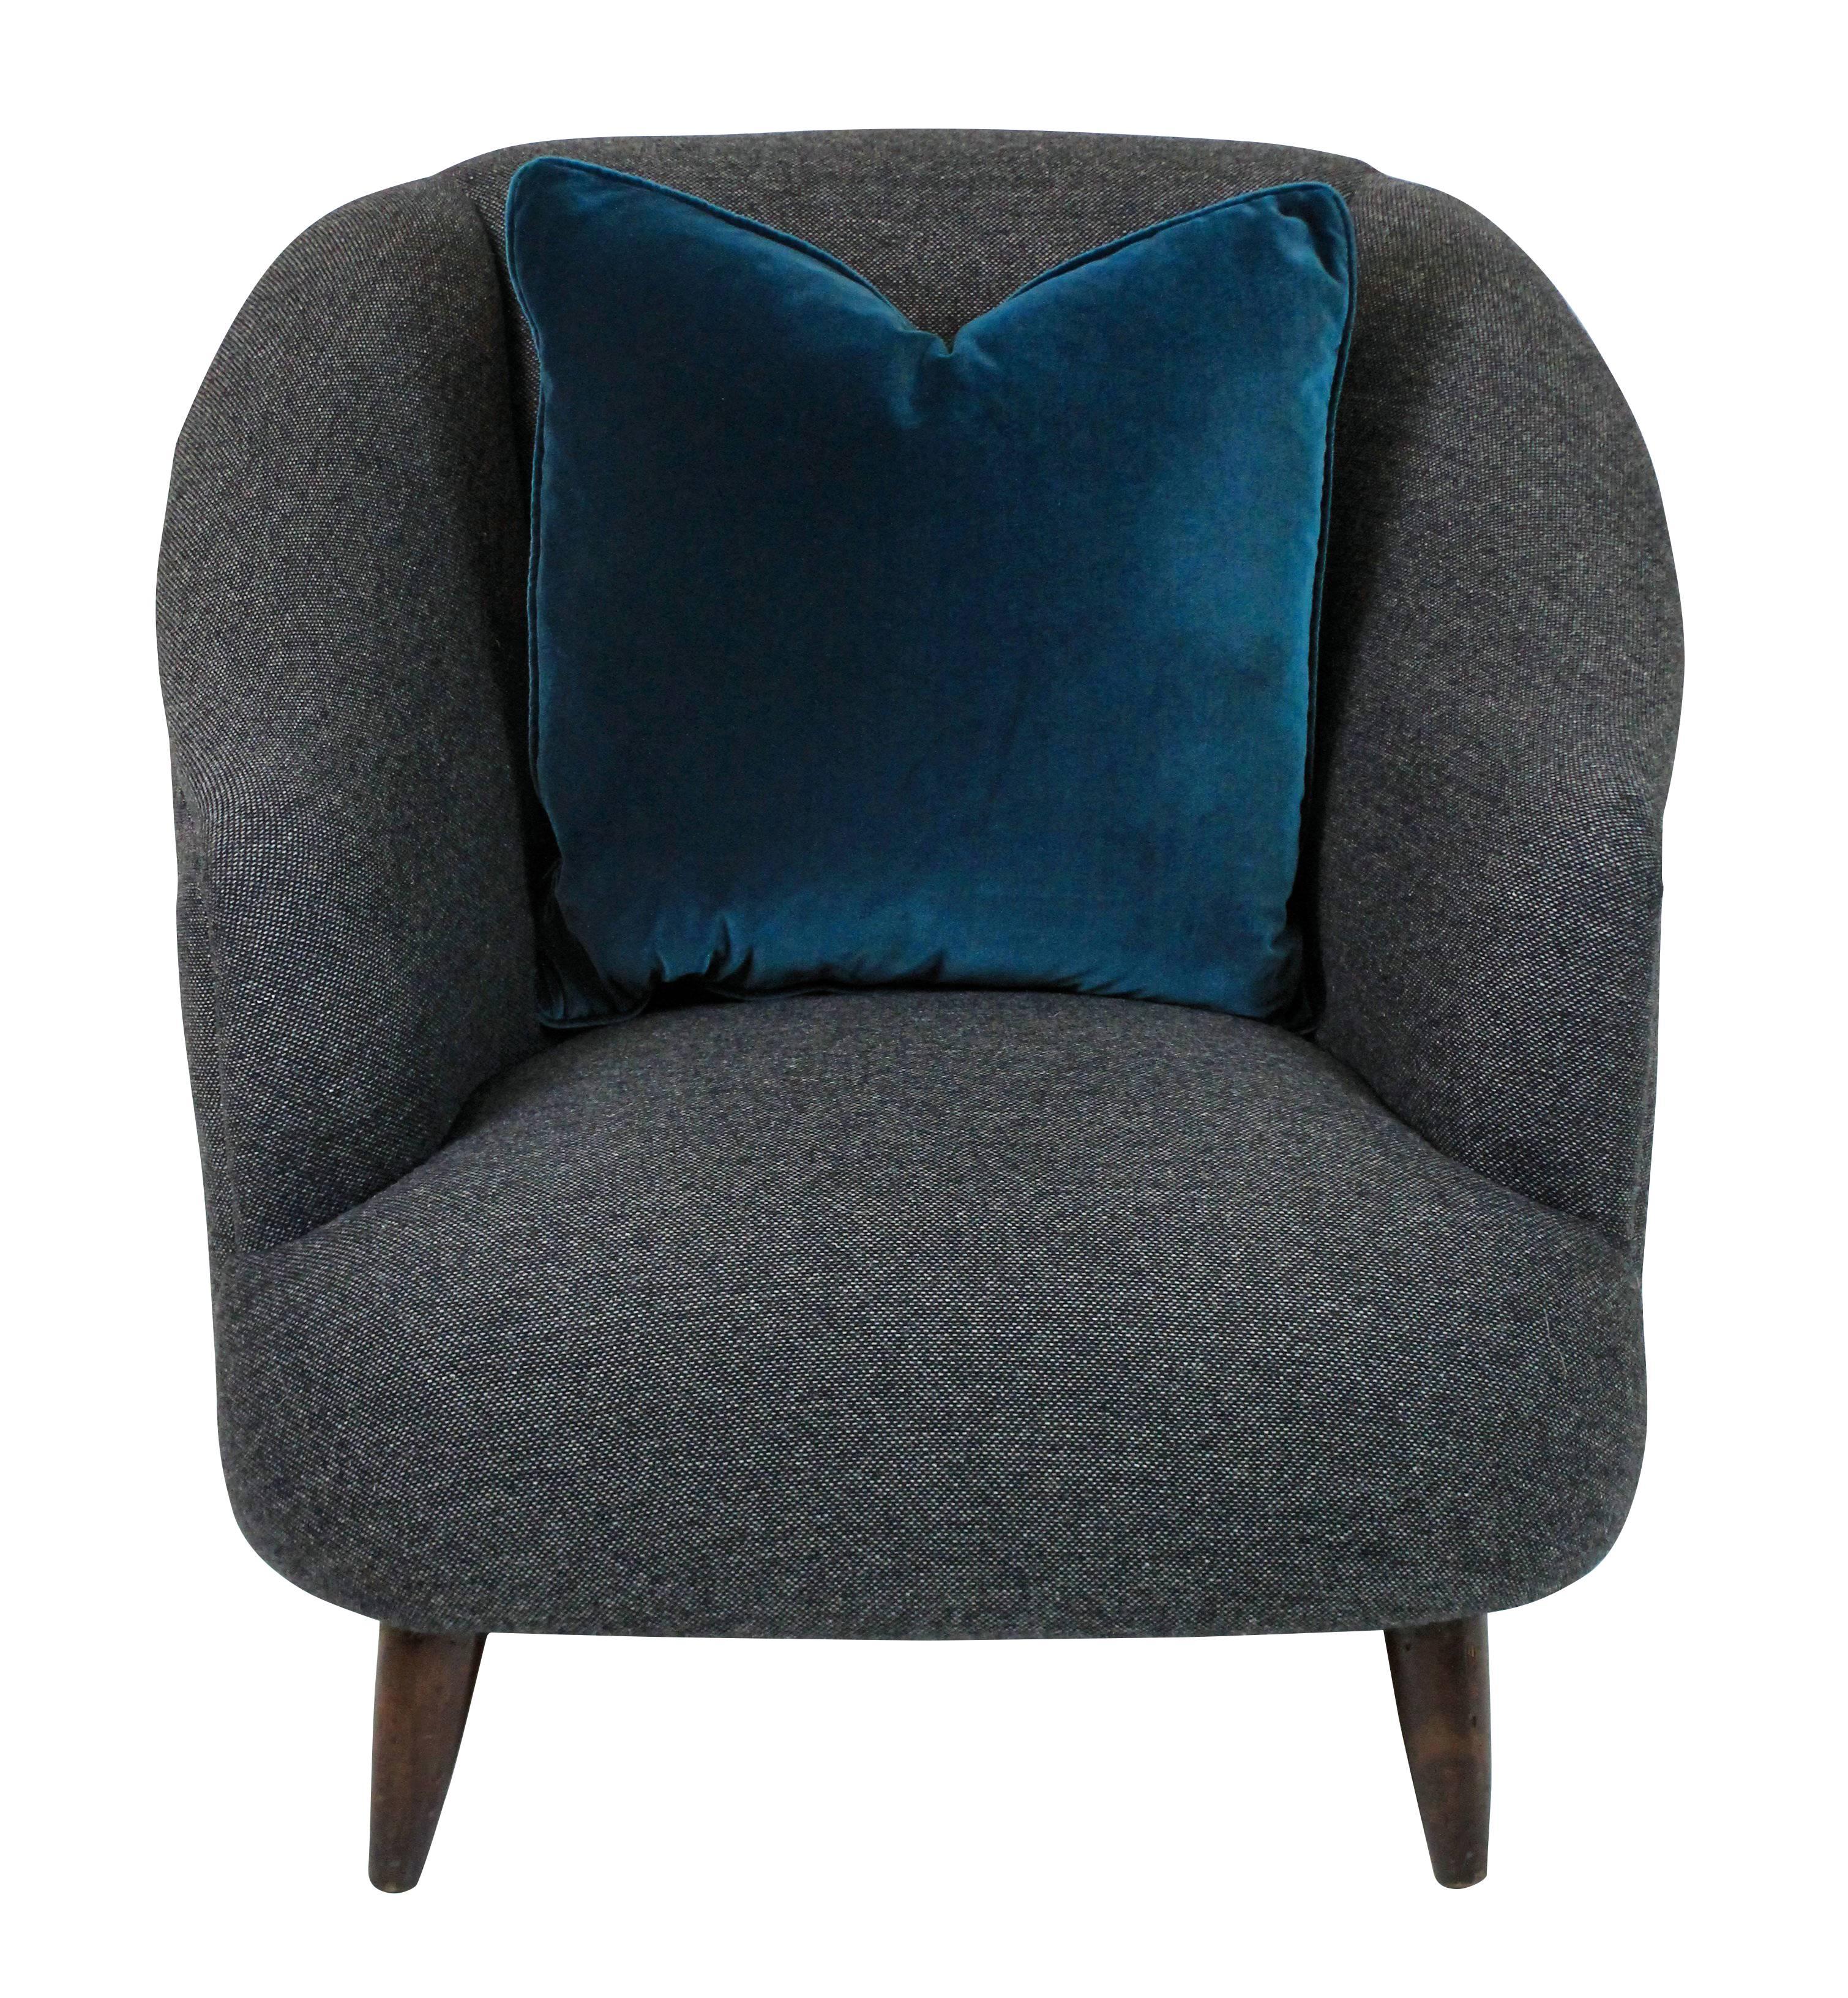 A pair of generous scale sculptural armchairs by Ulrich. Newly upholstered in dark grey wool.